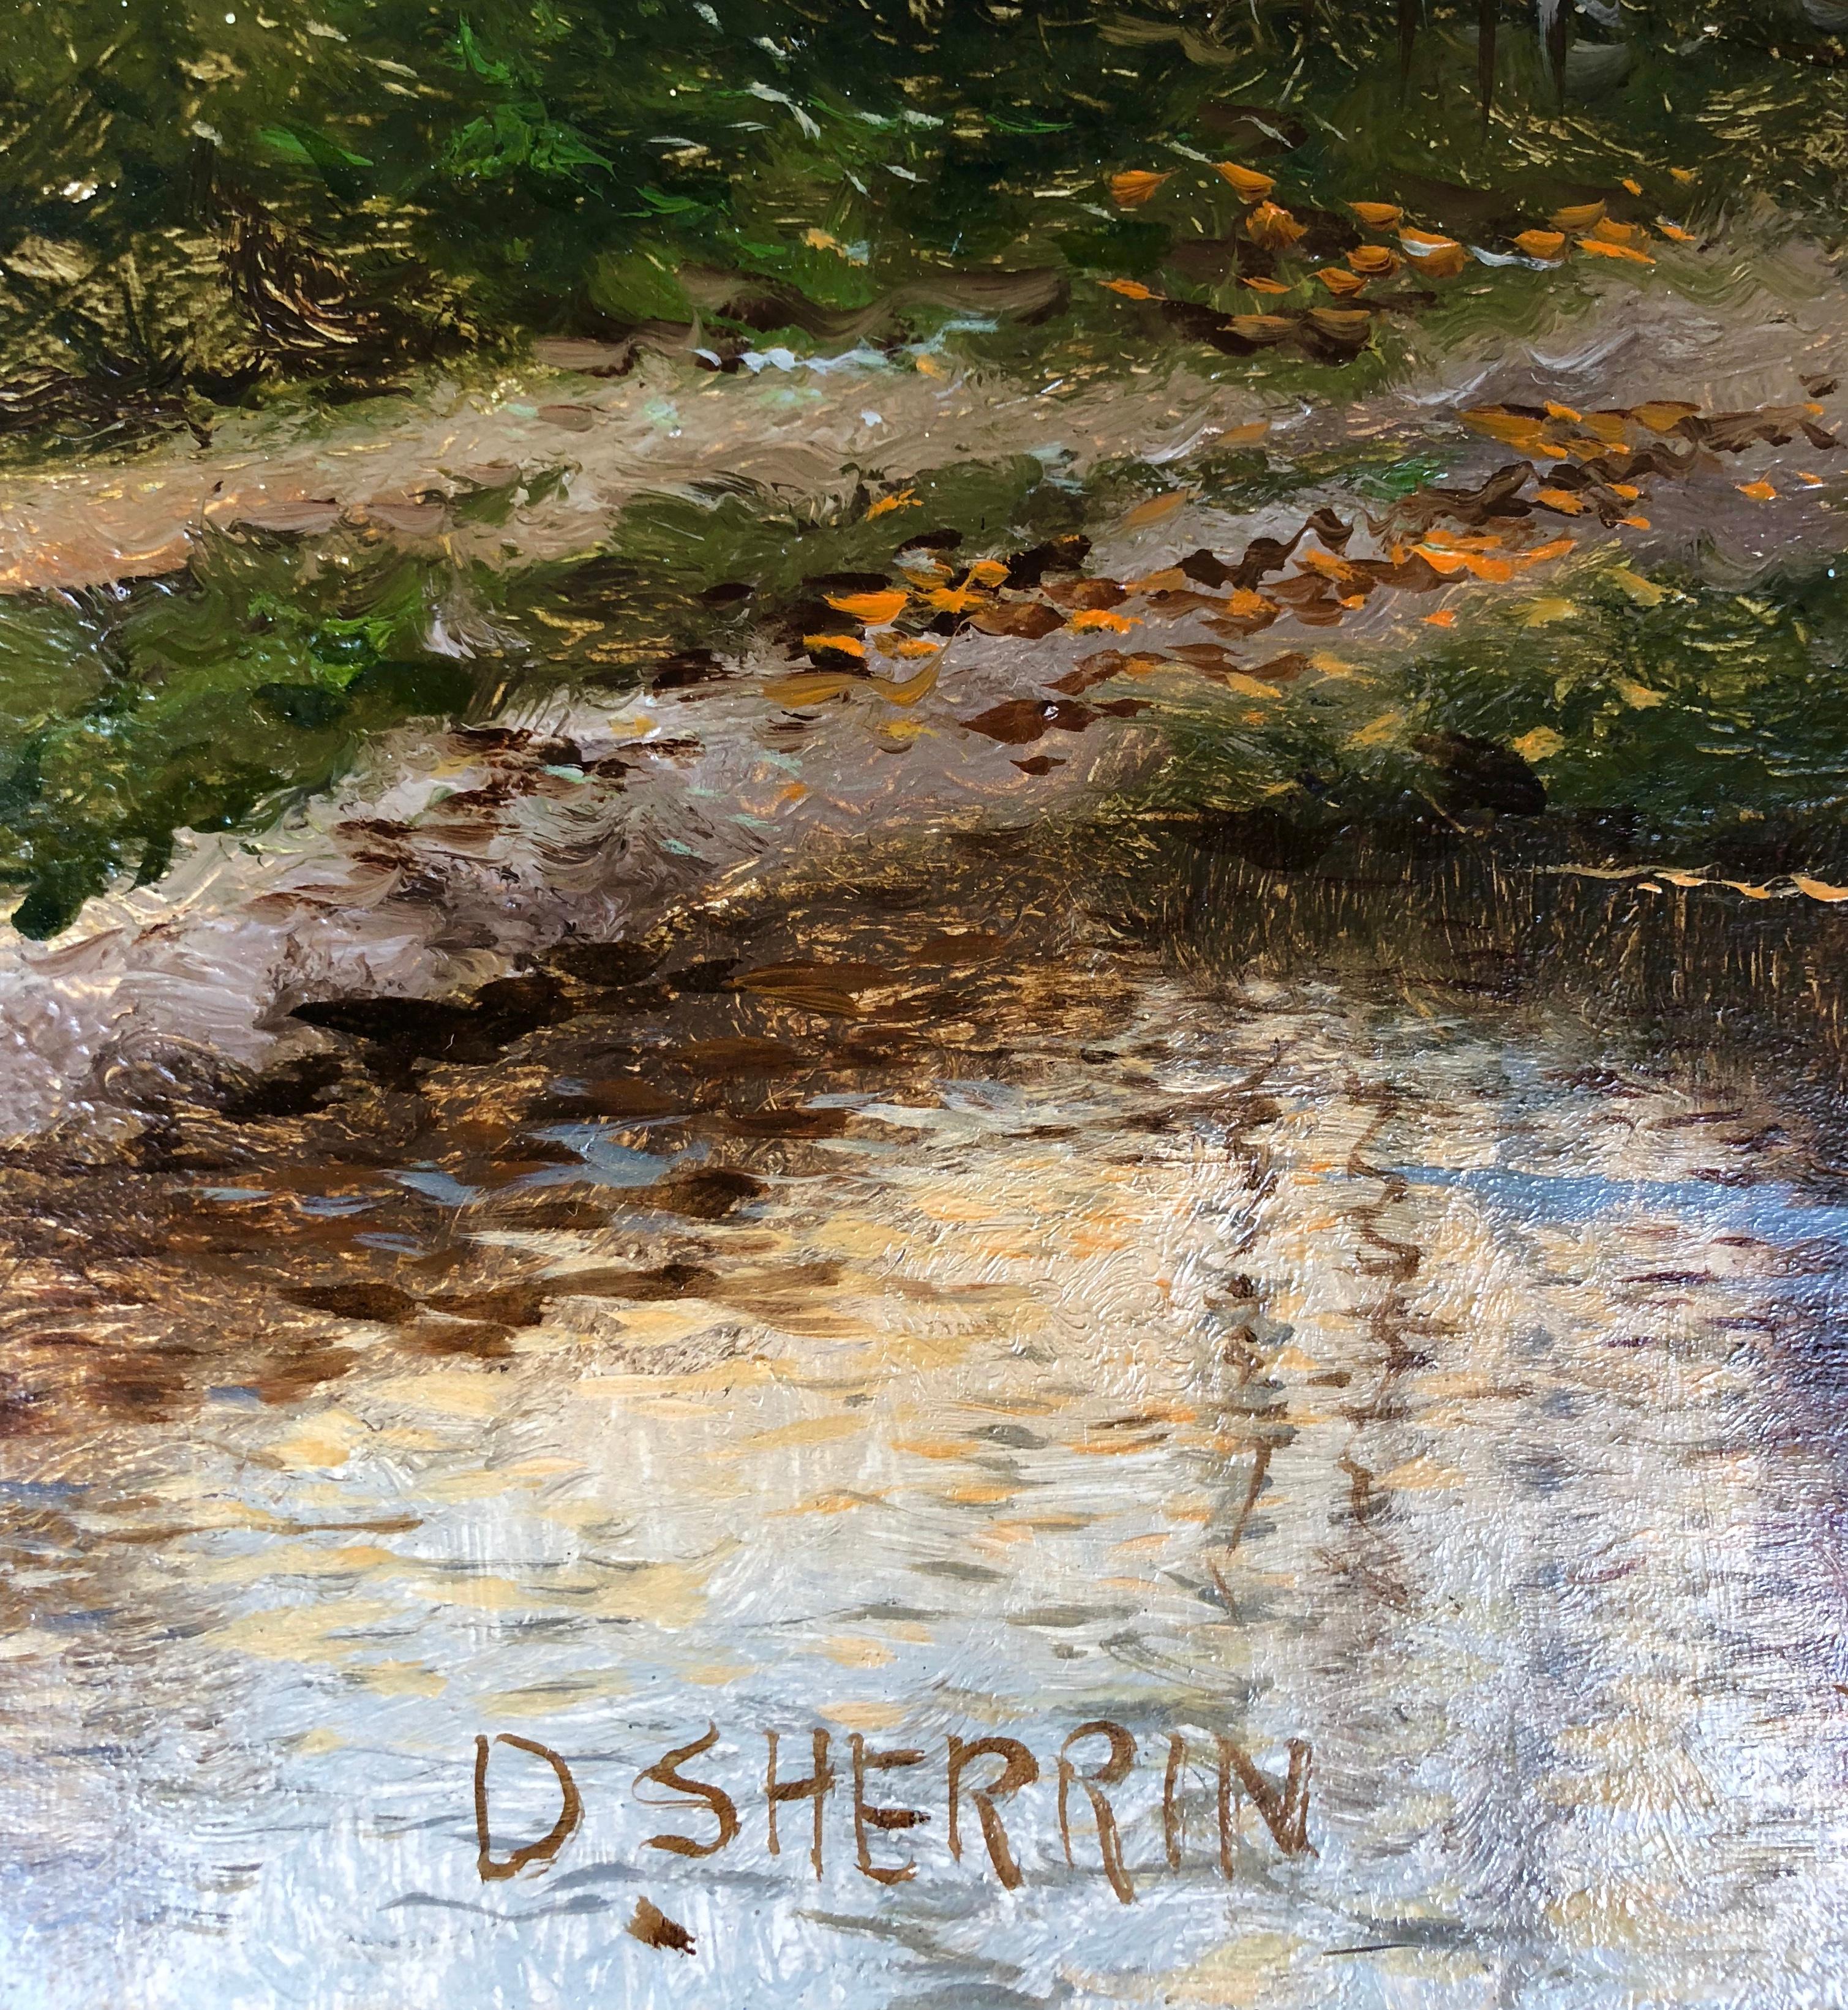 Oil on canvas, signed lower left.

Daniel Sherrin (1868-1940): Born in Brentwood, Essex in 1868, Daniel Sherrin was the son of John Sherrin and, later, the father of R. D. Sherrin, both well-known painters in their own right. He received his